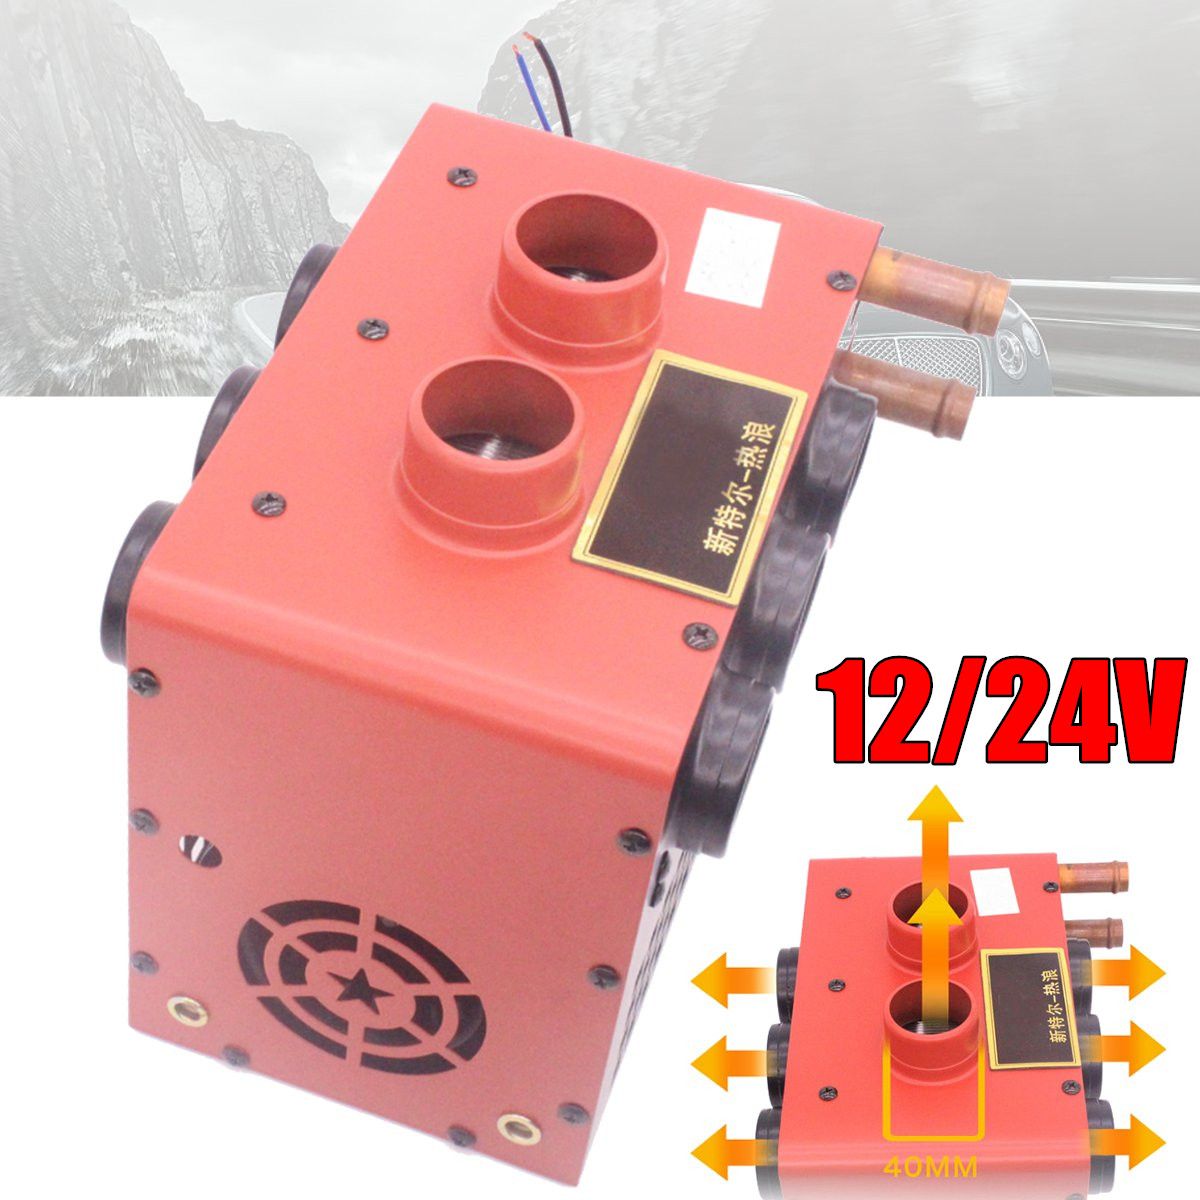 12V-24V-Iron-Compact-Heater-Three-side-Blow-Diversion-35-Copper-Tubes-Car-Heater-1289156